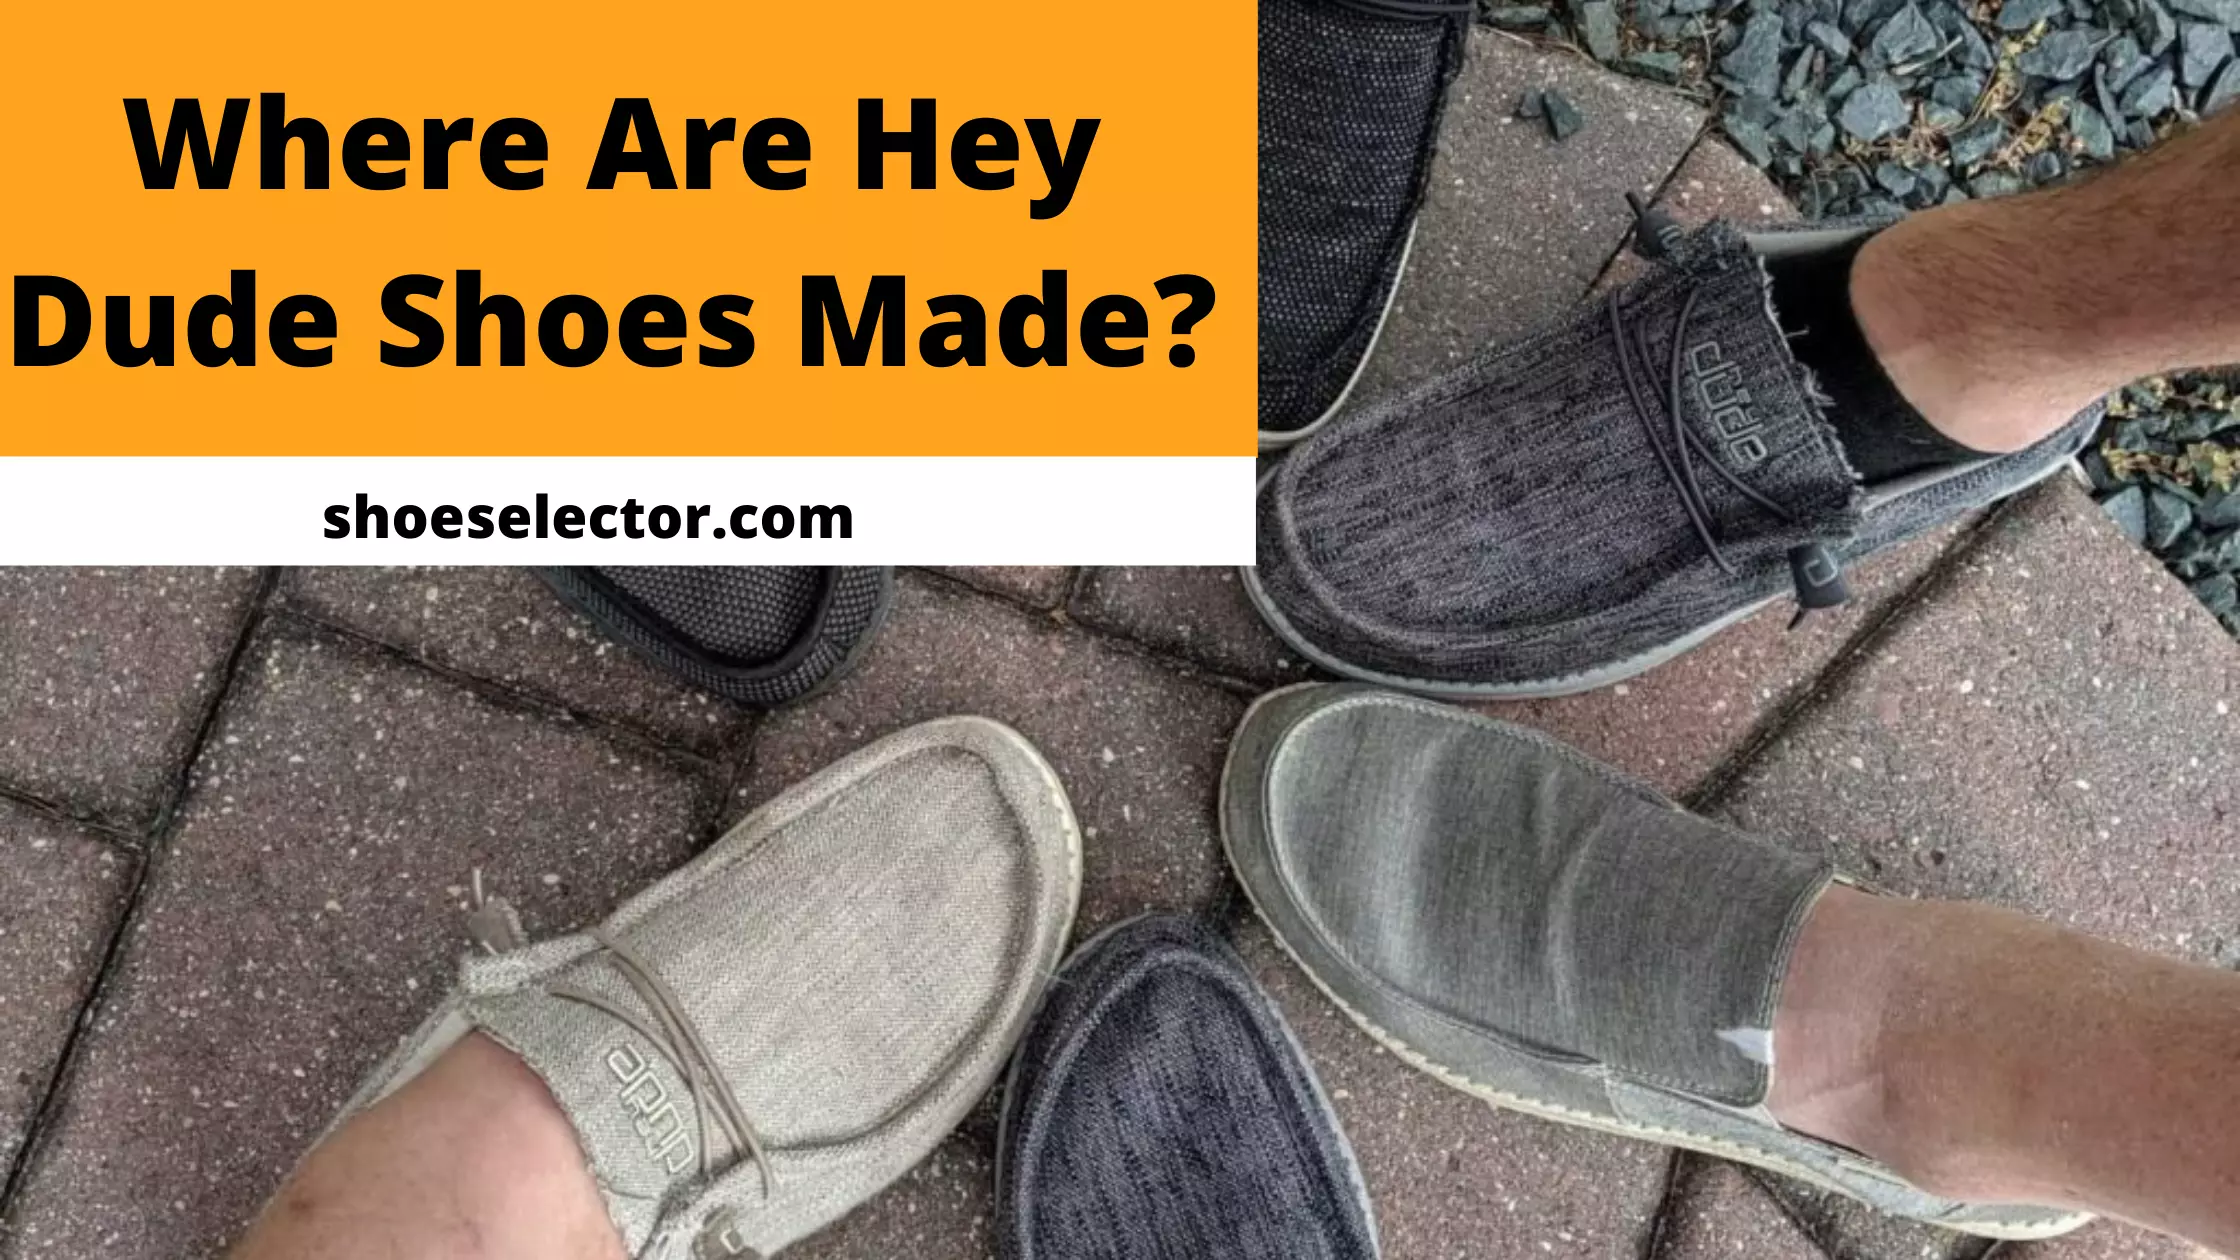 Where Are Hey Dude Shoes Made? - Complete Guide